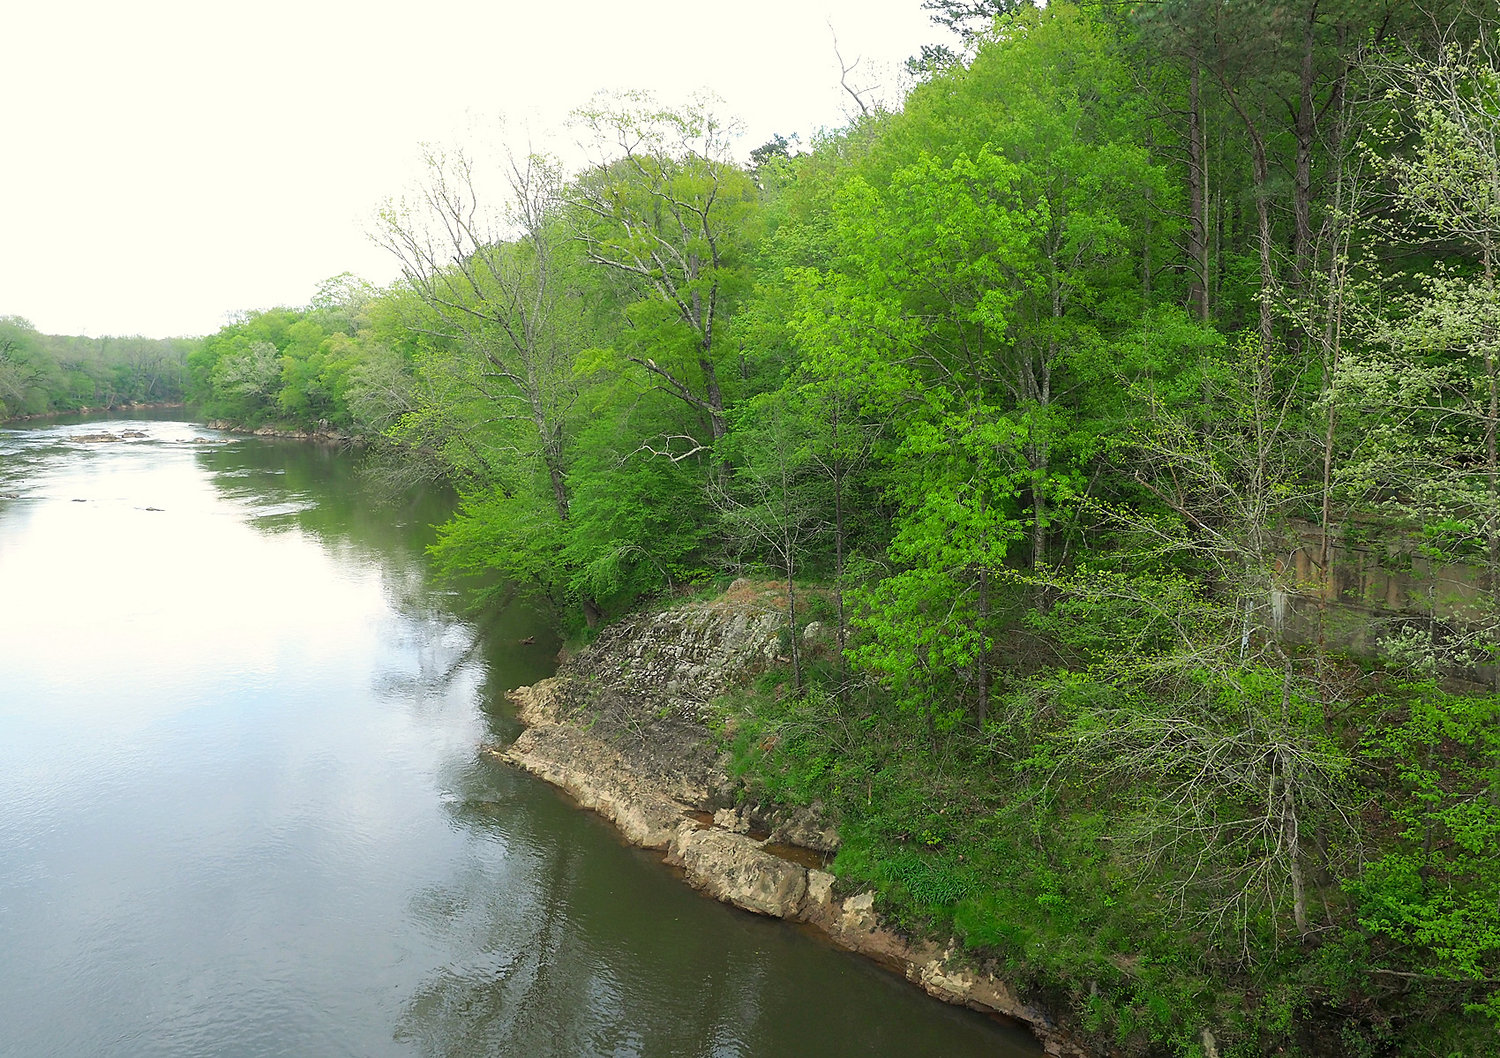 A bank of the Haw River. This picture has graced many an update stories about Pittsboro's drinking water woes, and for that reason was picked by Taylor Heeden.